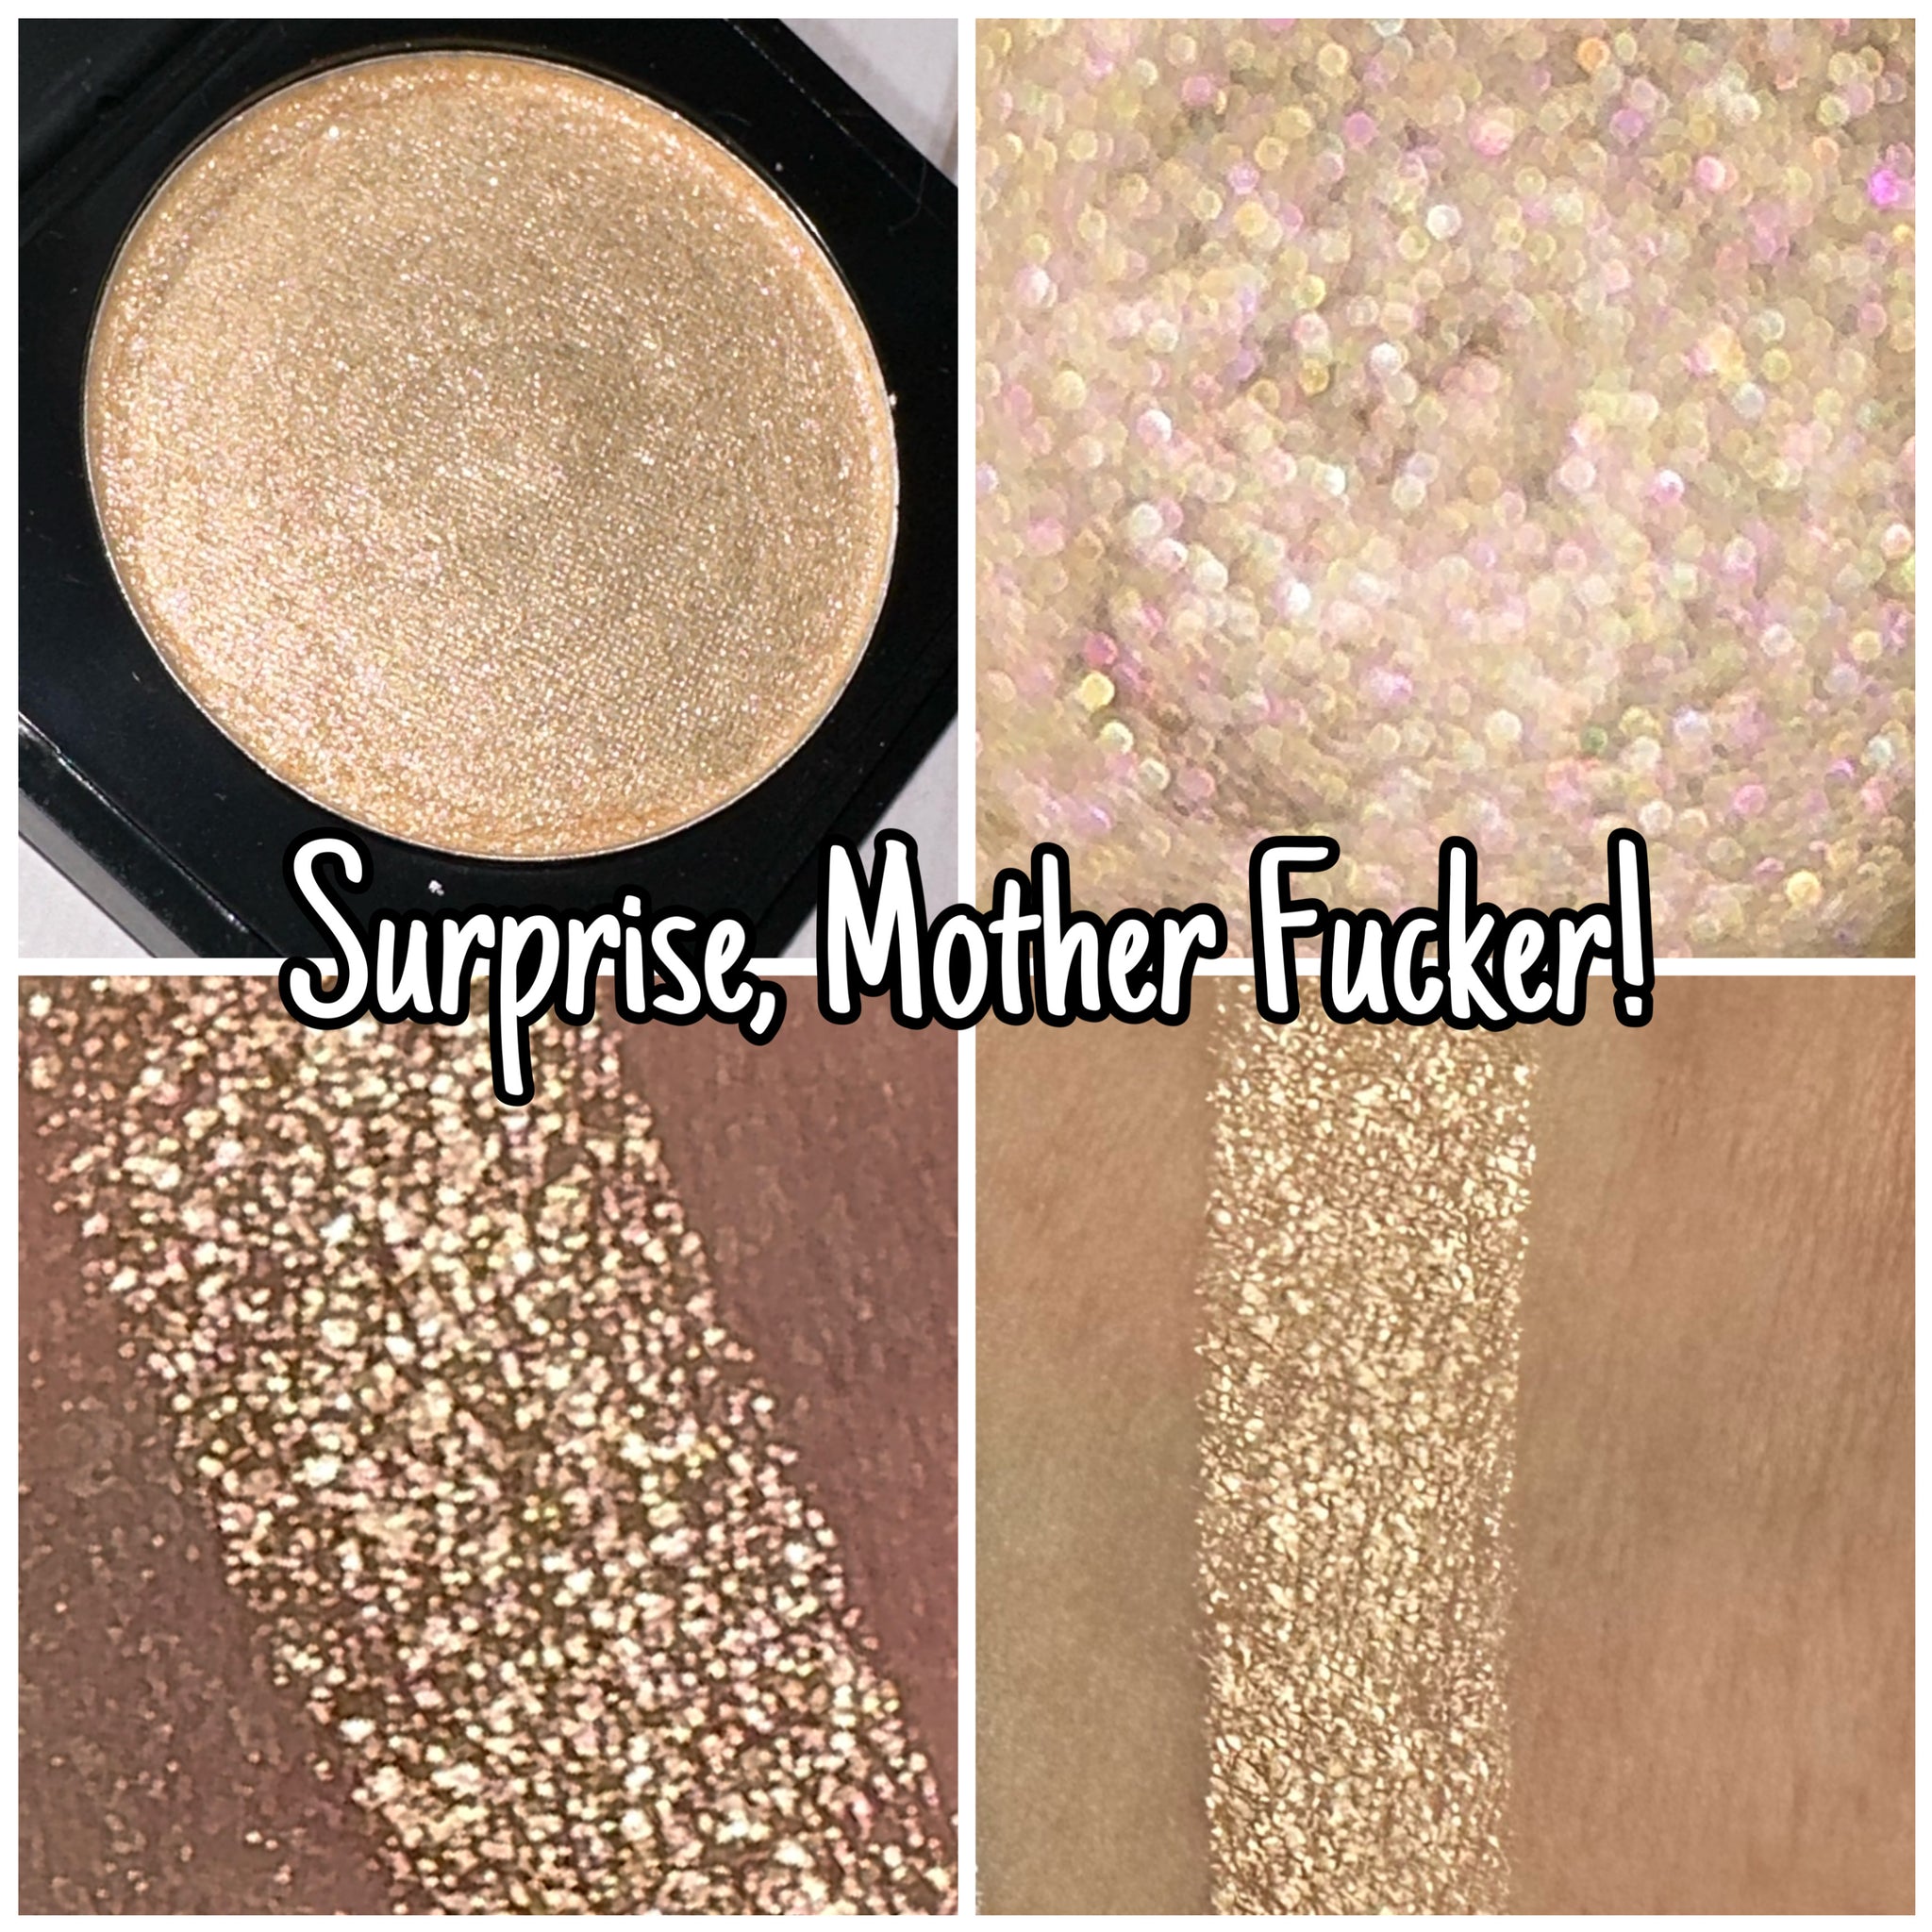 shade beauty, the dexter collection, dexter morgan, dexter morgan makeup collection, indie makeup, indie beauty, indie cosmetics, handmade makeup products, surprise mother fucker, pressed highlighter